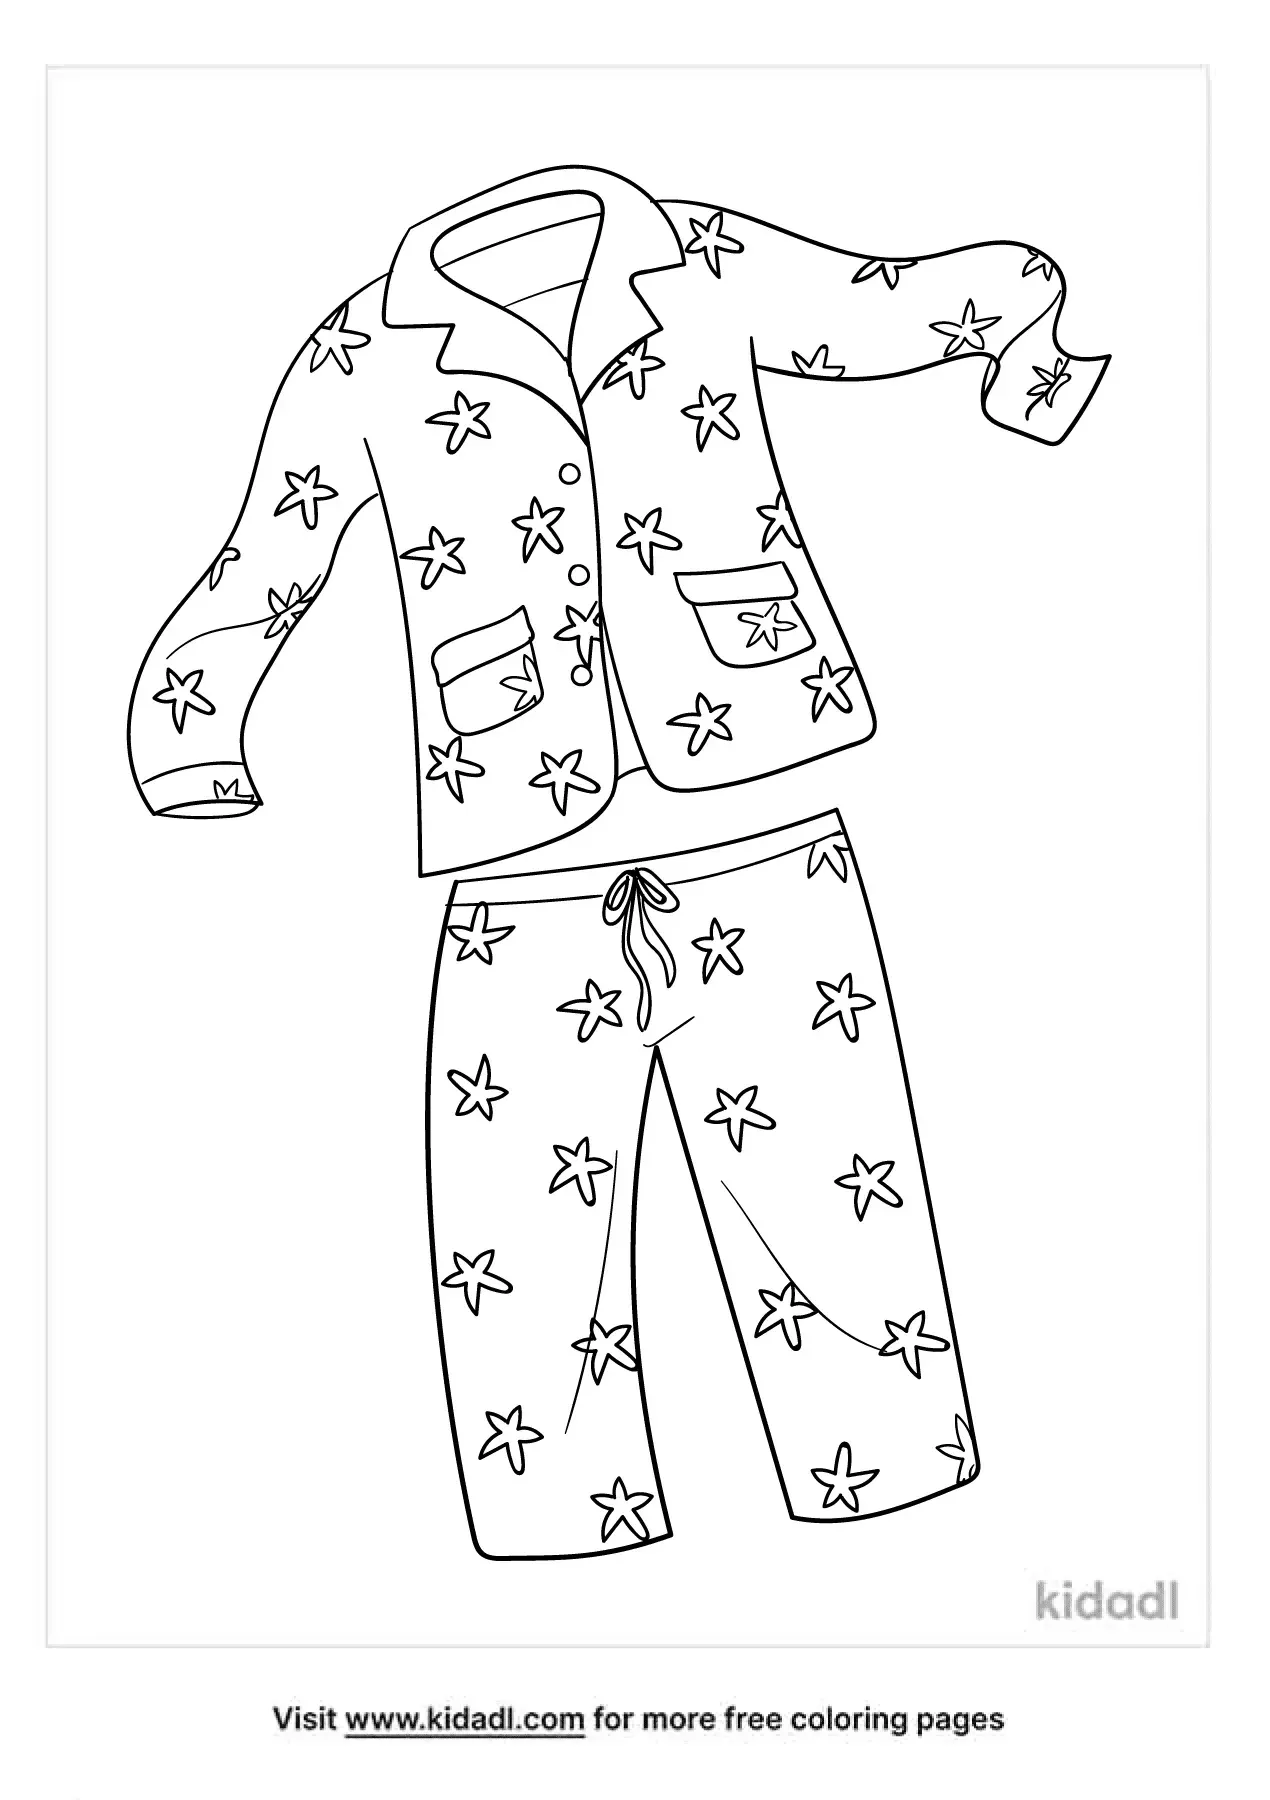 Pajama Day Coloring Pages Sketch Coloring Page